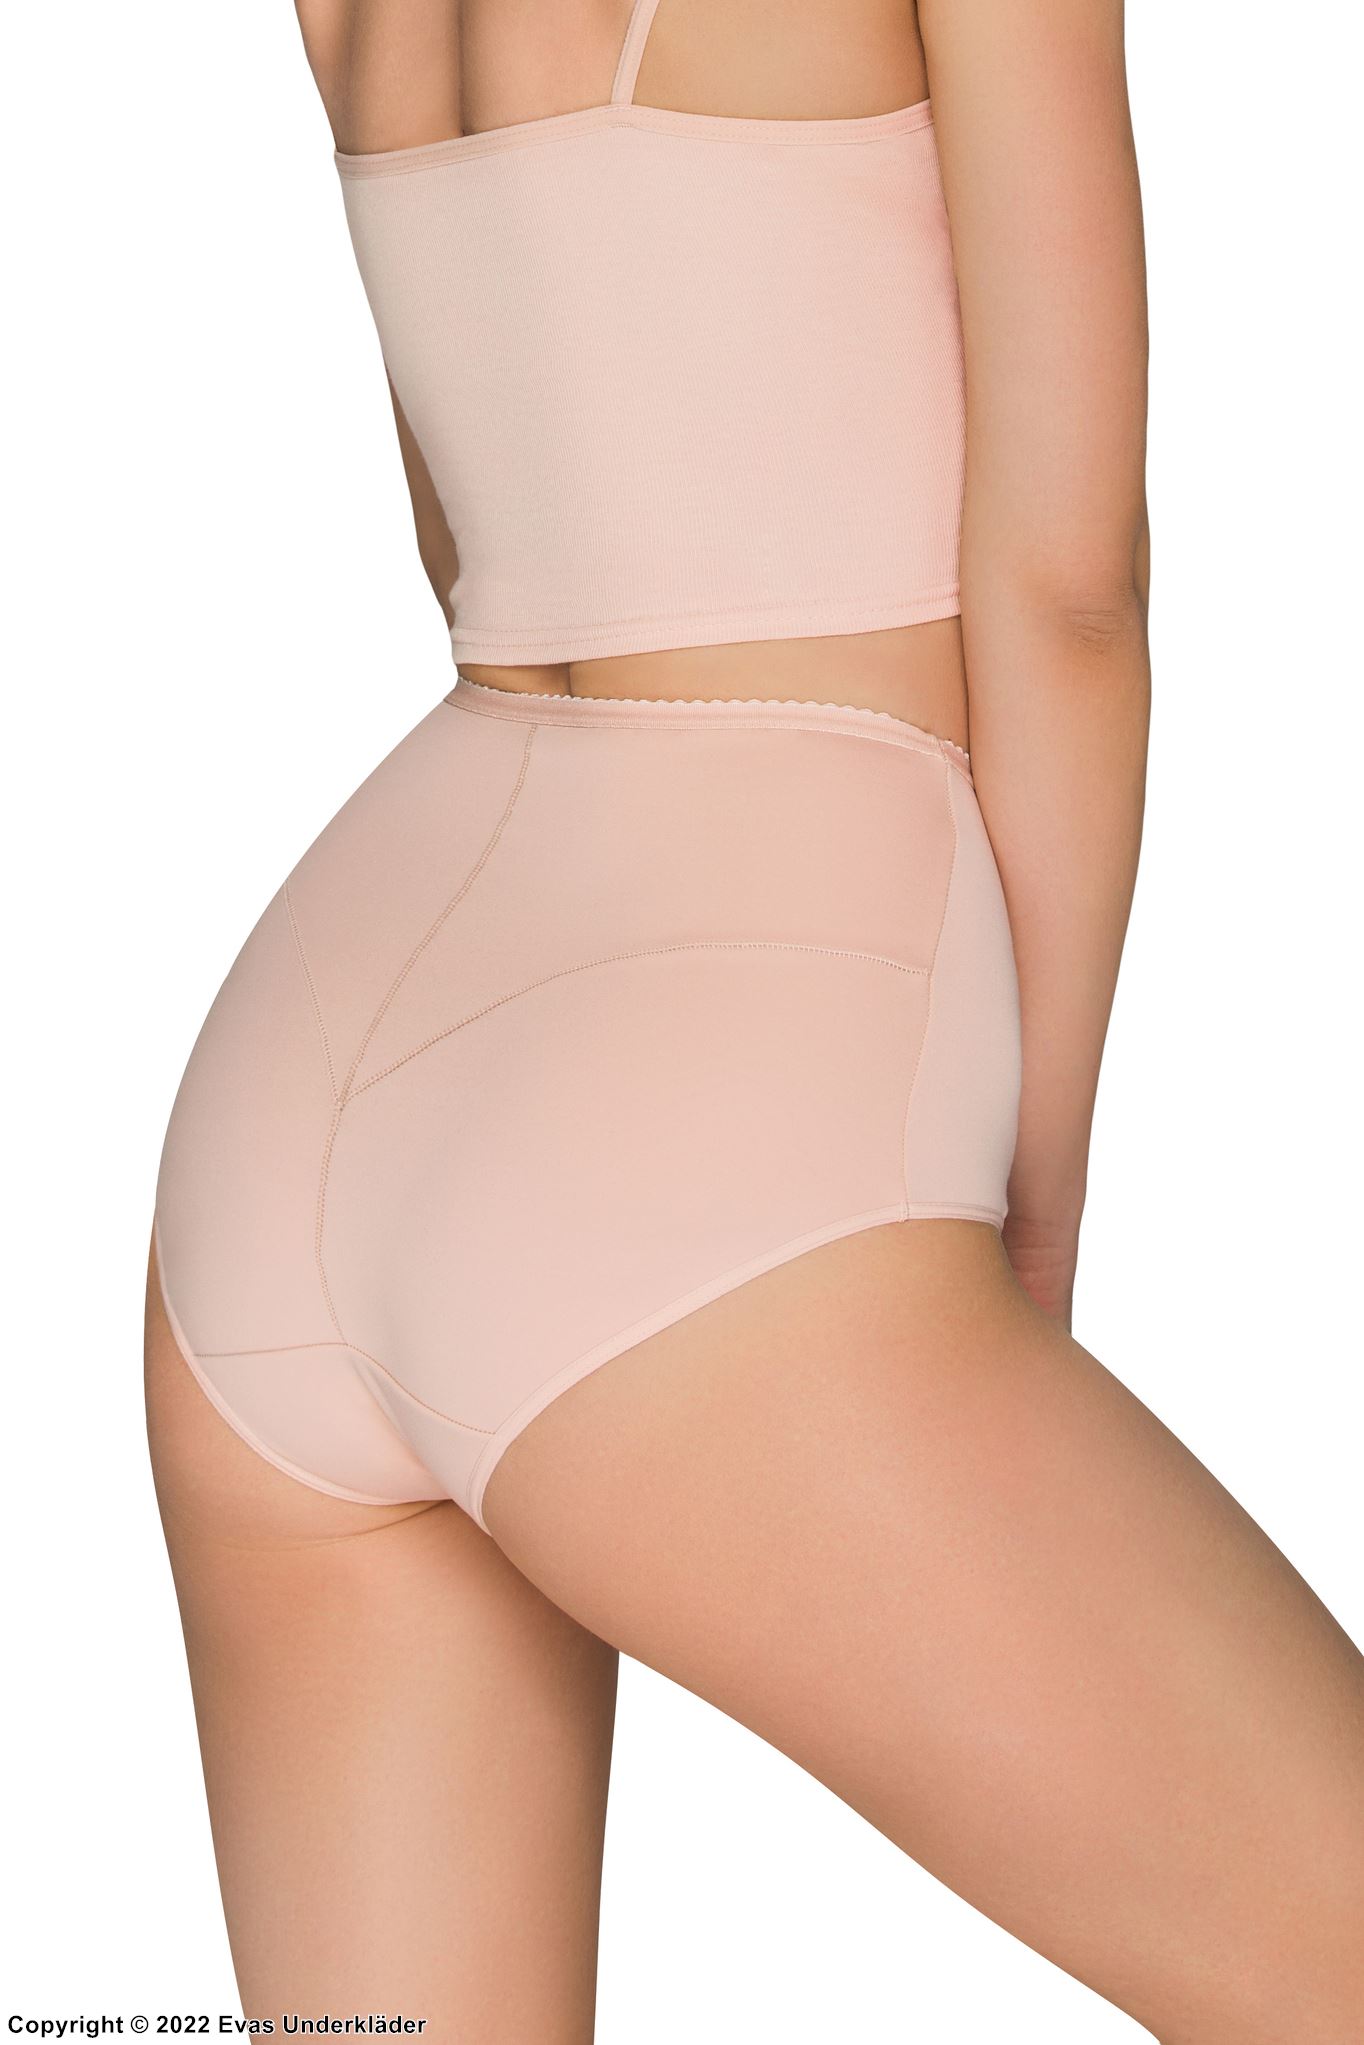 Shaping panties, smooth and comfortable fabric, belly, waist and buttocks control, invisible under clothes